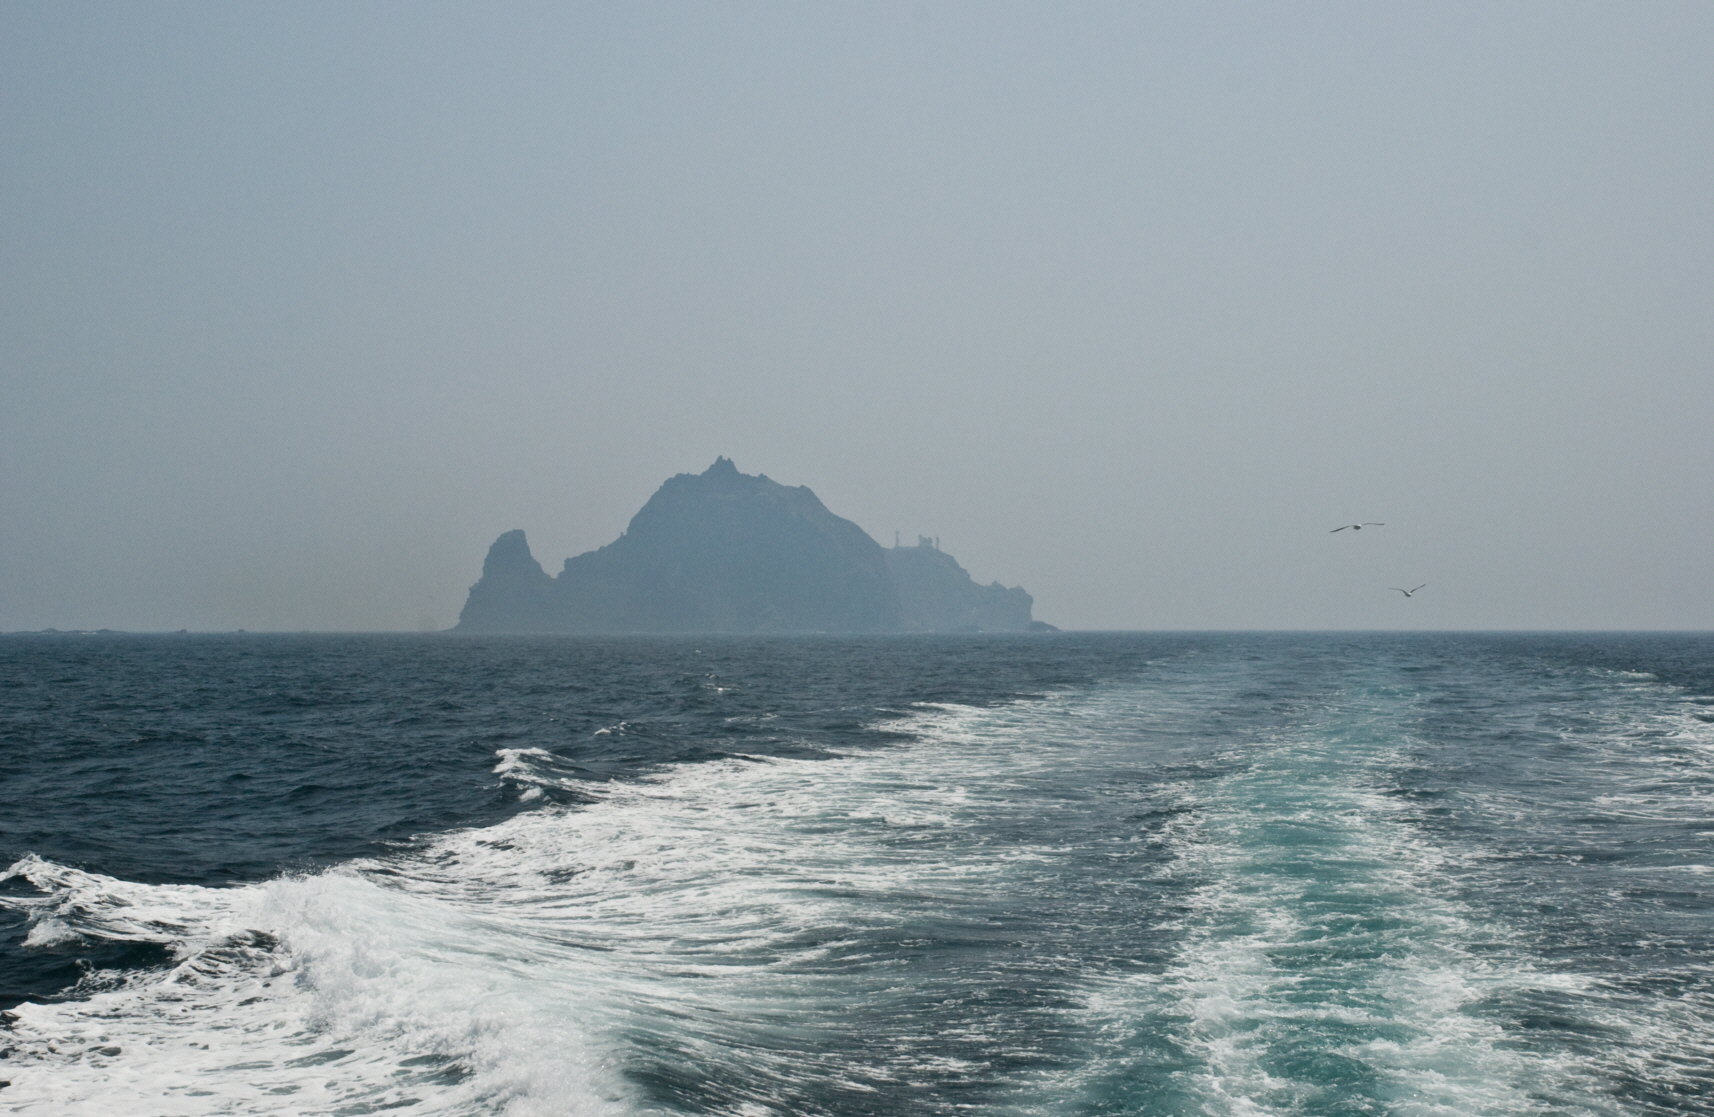 A picture of Korea's Dokdo Island on a hazy day 독도 獨島 竹島 たけしま